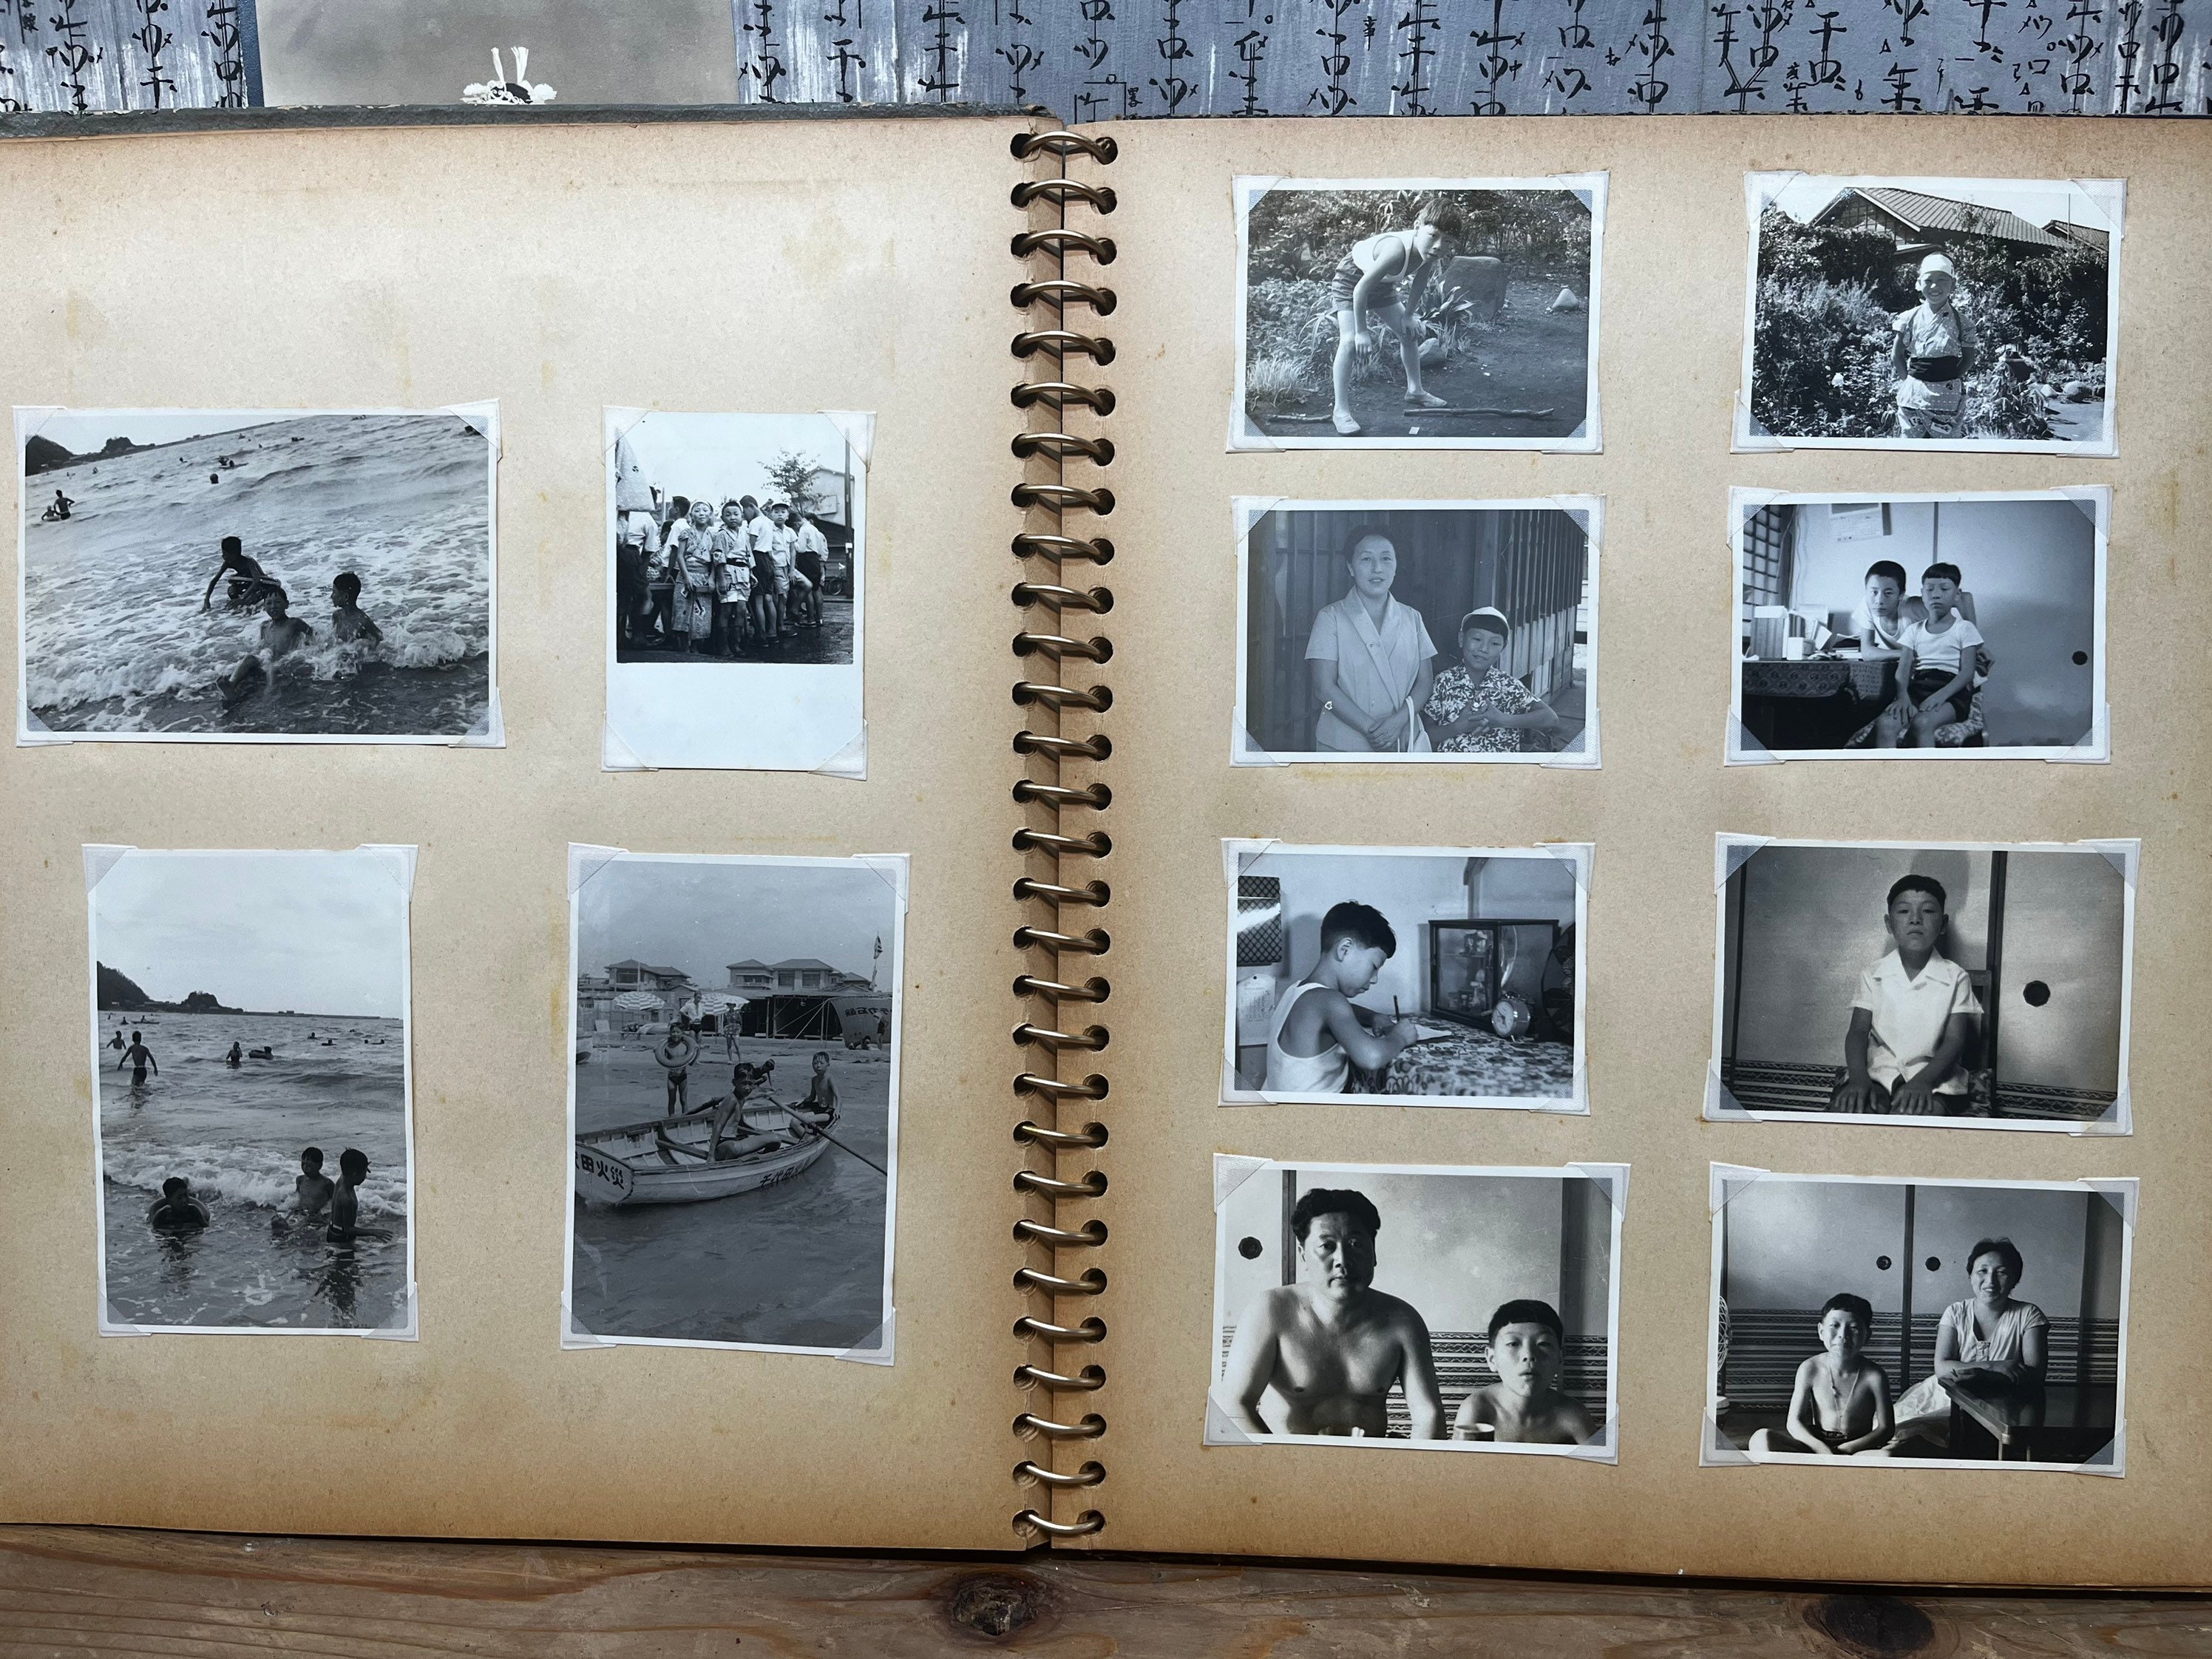 Japanese vintage photo album from the early 20th century